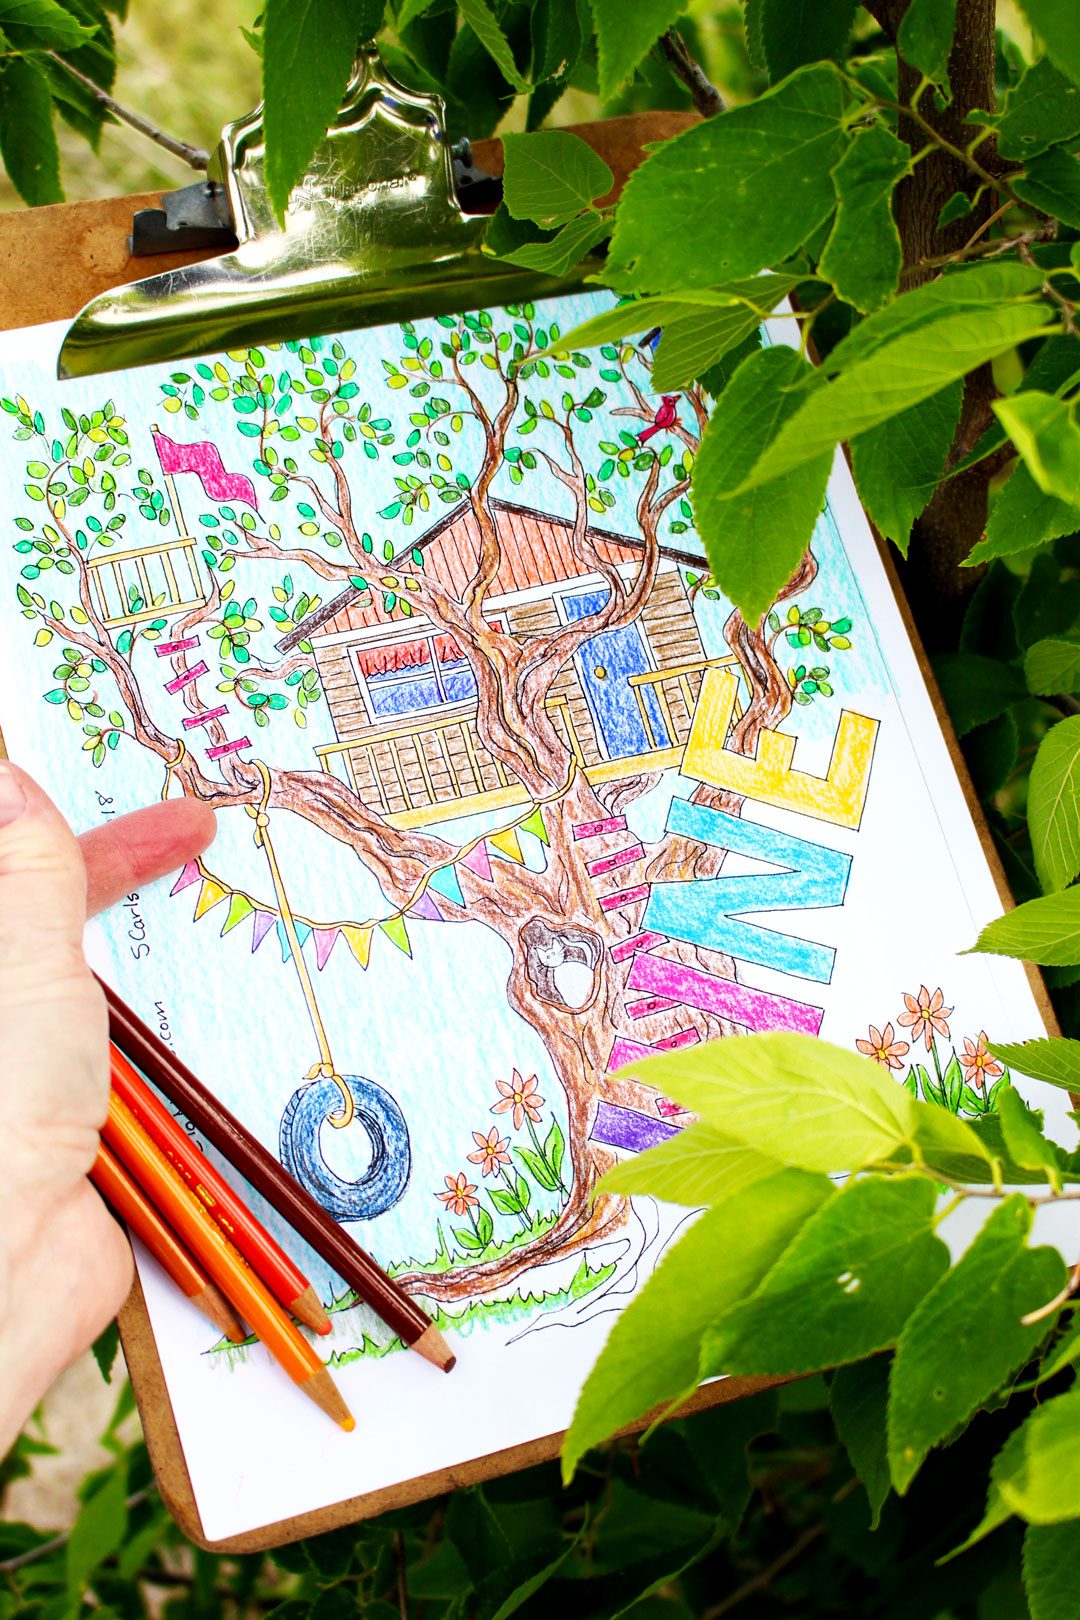 A hand holding colored pencils and a month of June coloring page with a tree house in a large tree.